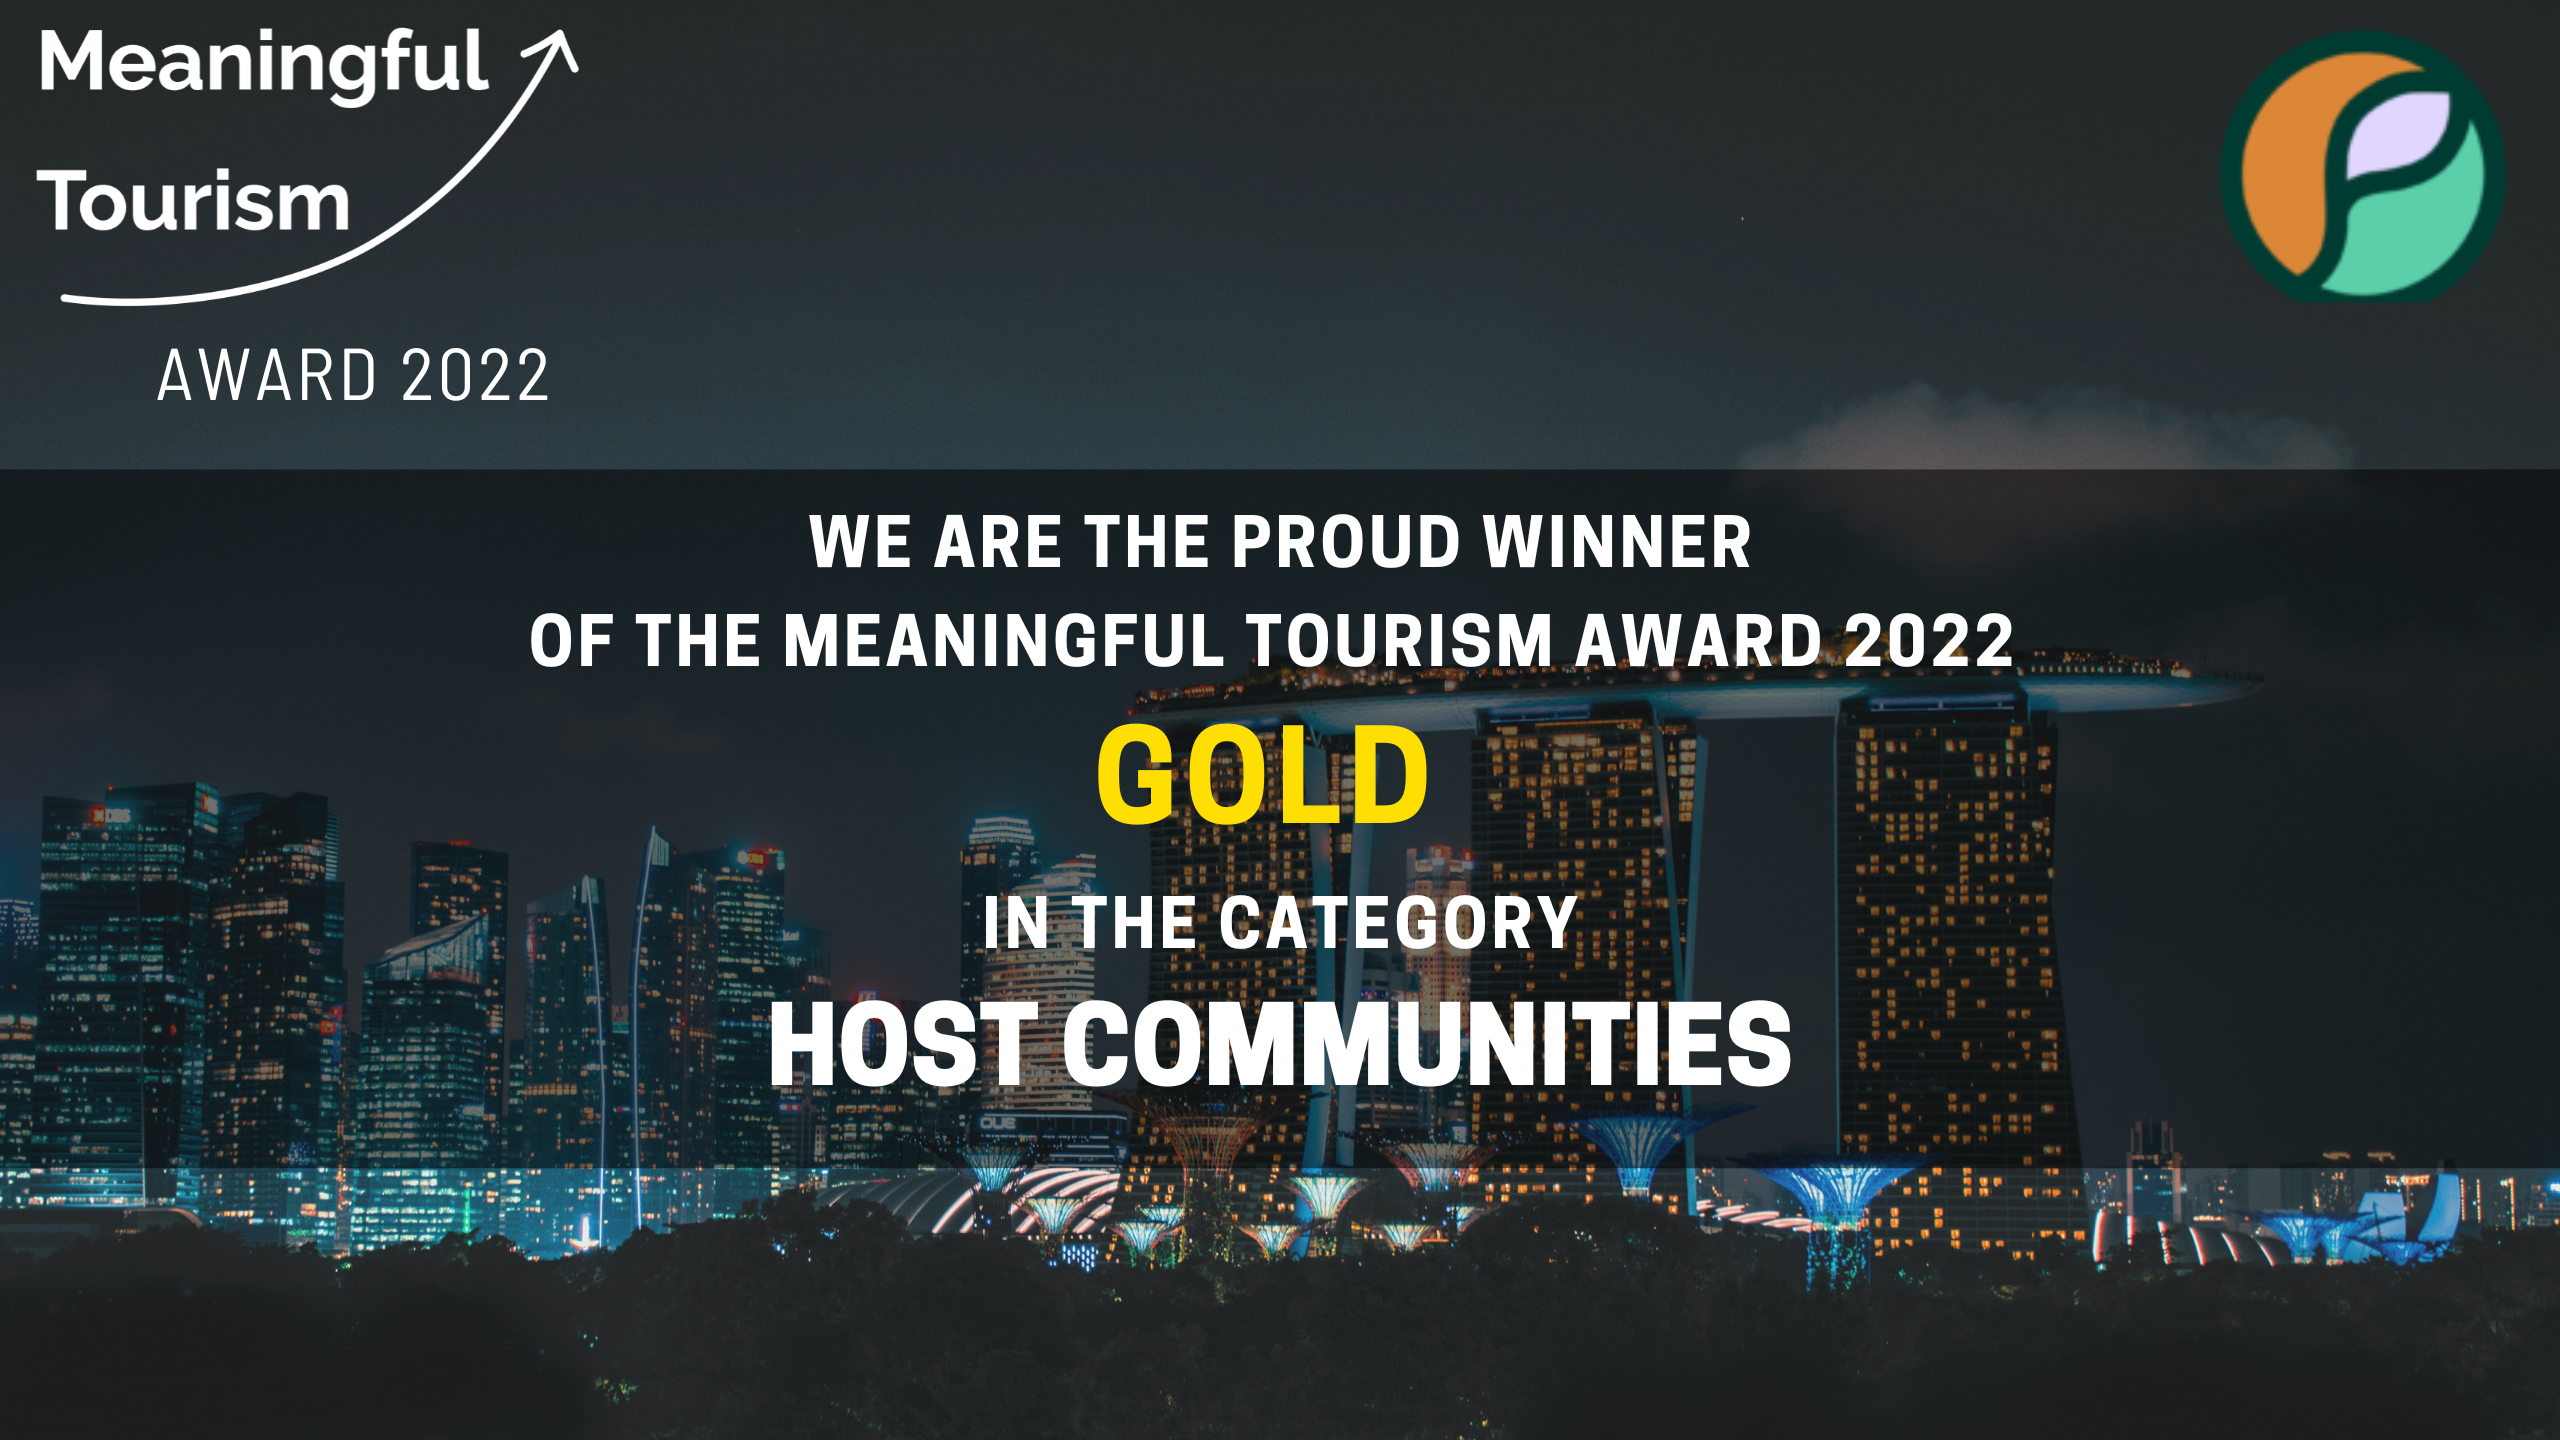 GOLD Meaningful Tourism Award - Planeterra